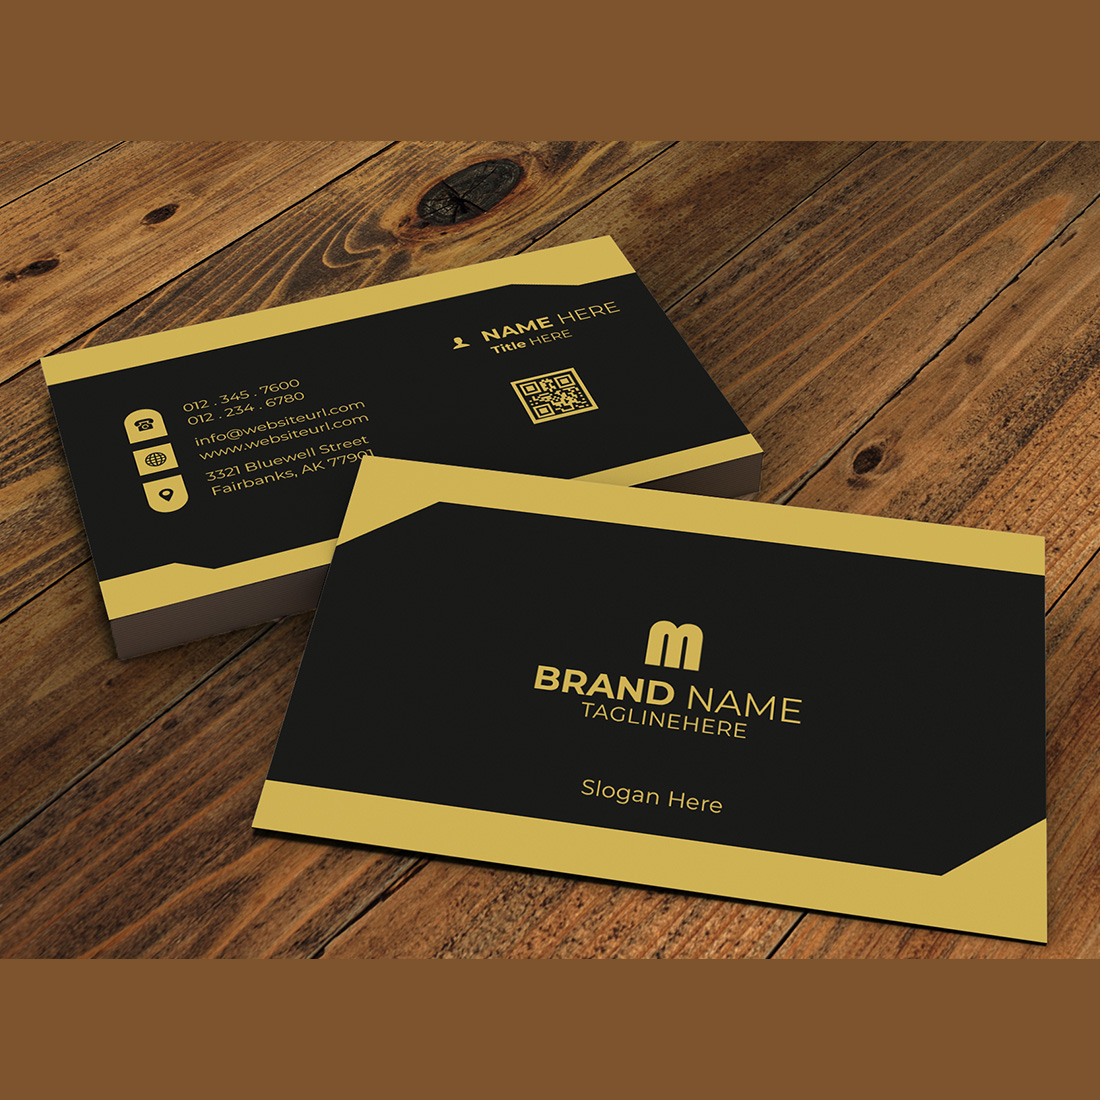 02Business Card Design Templates preview image.